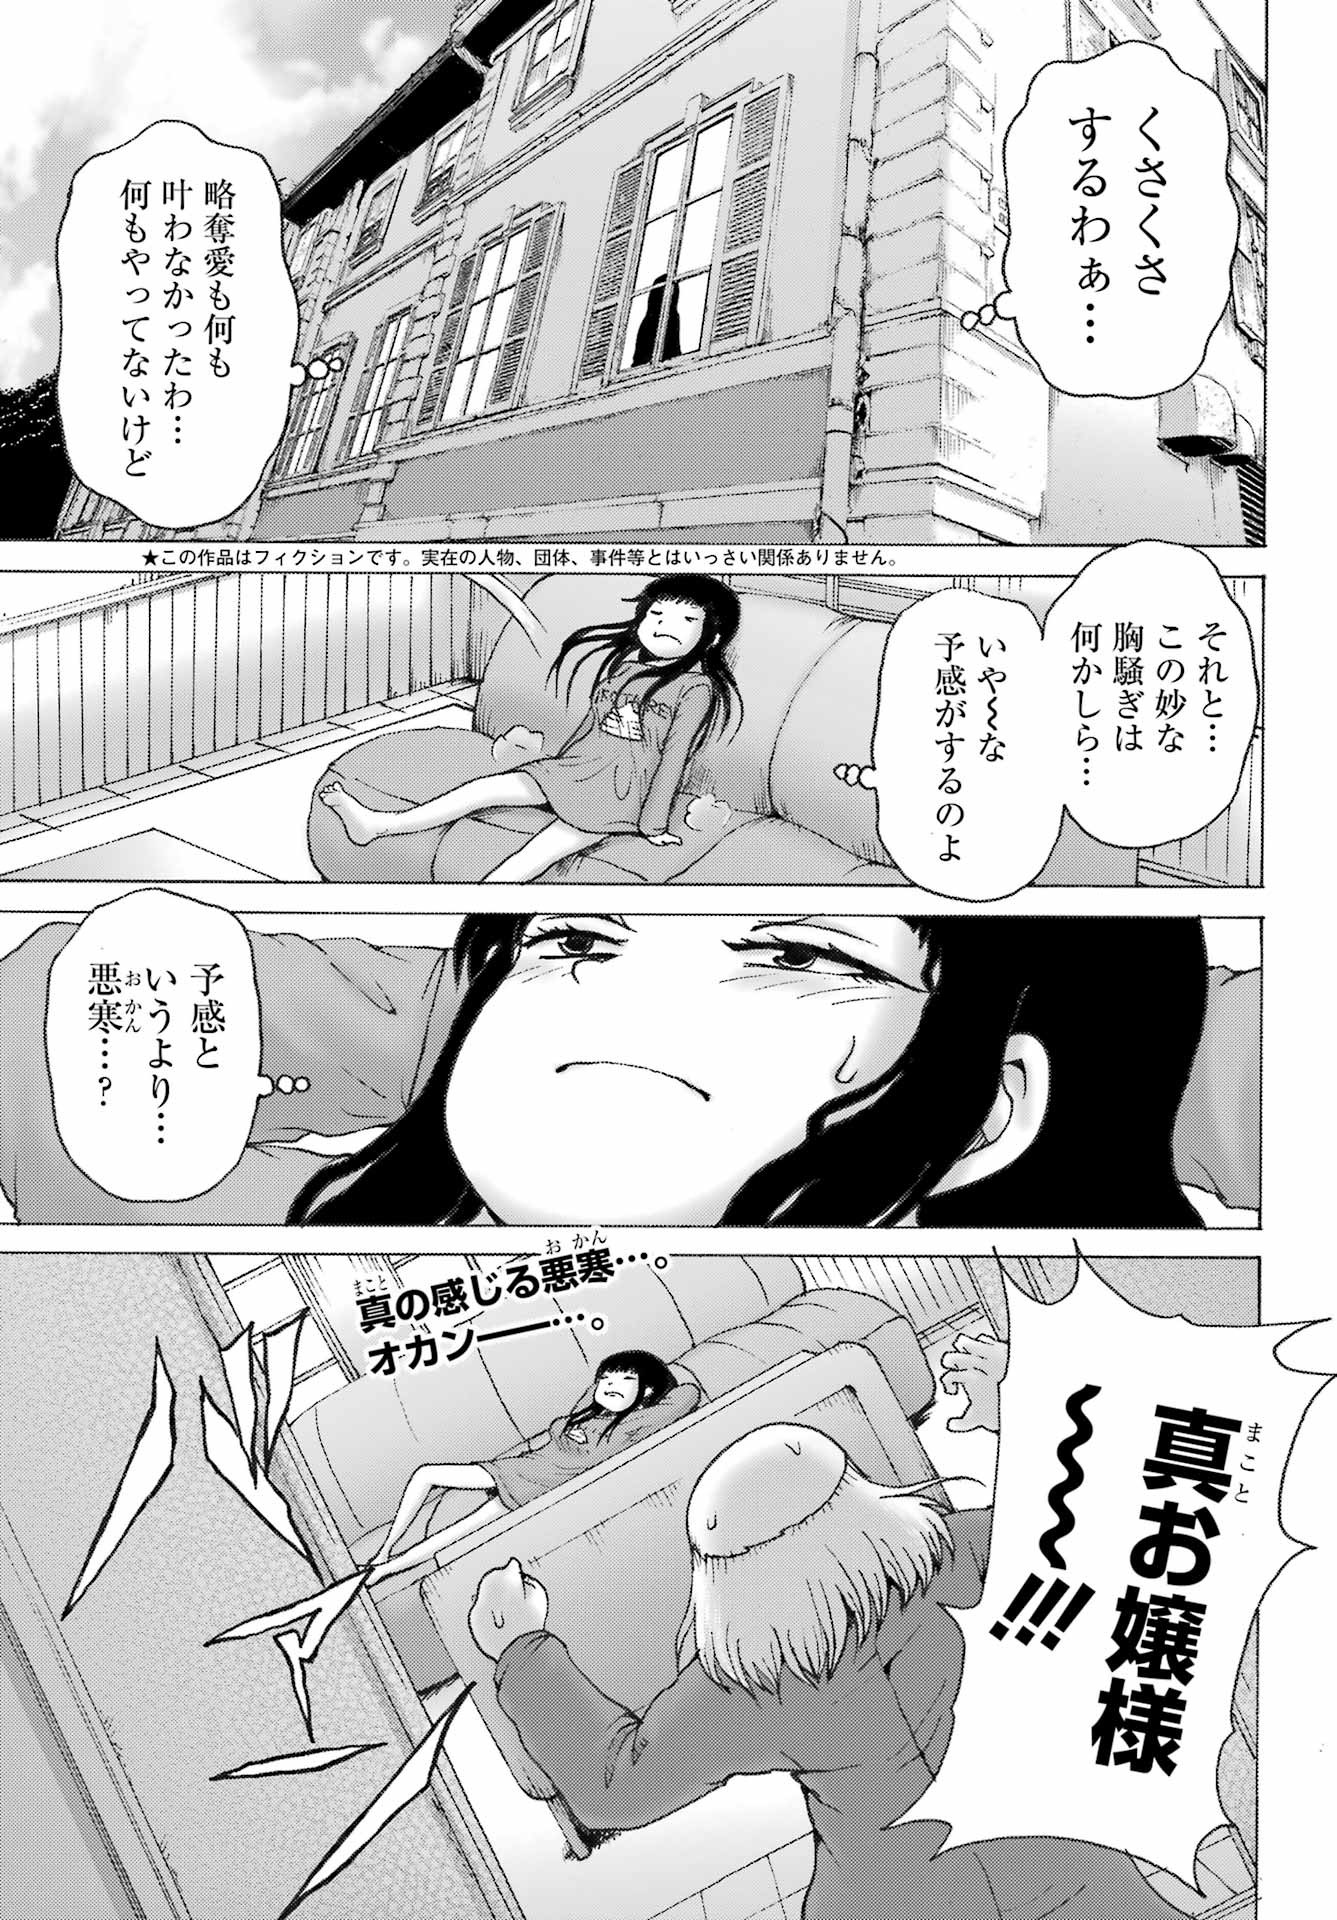 High Score Girl DASH - Chapter 31 - Page 1